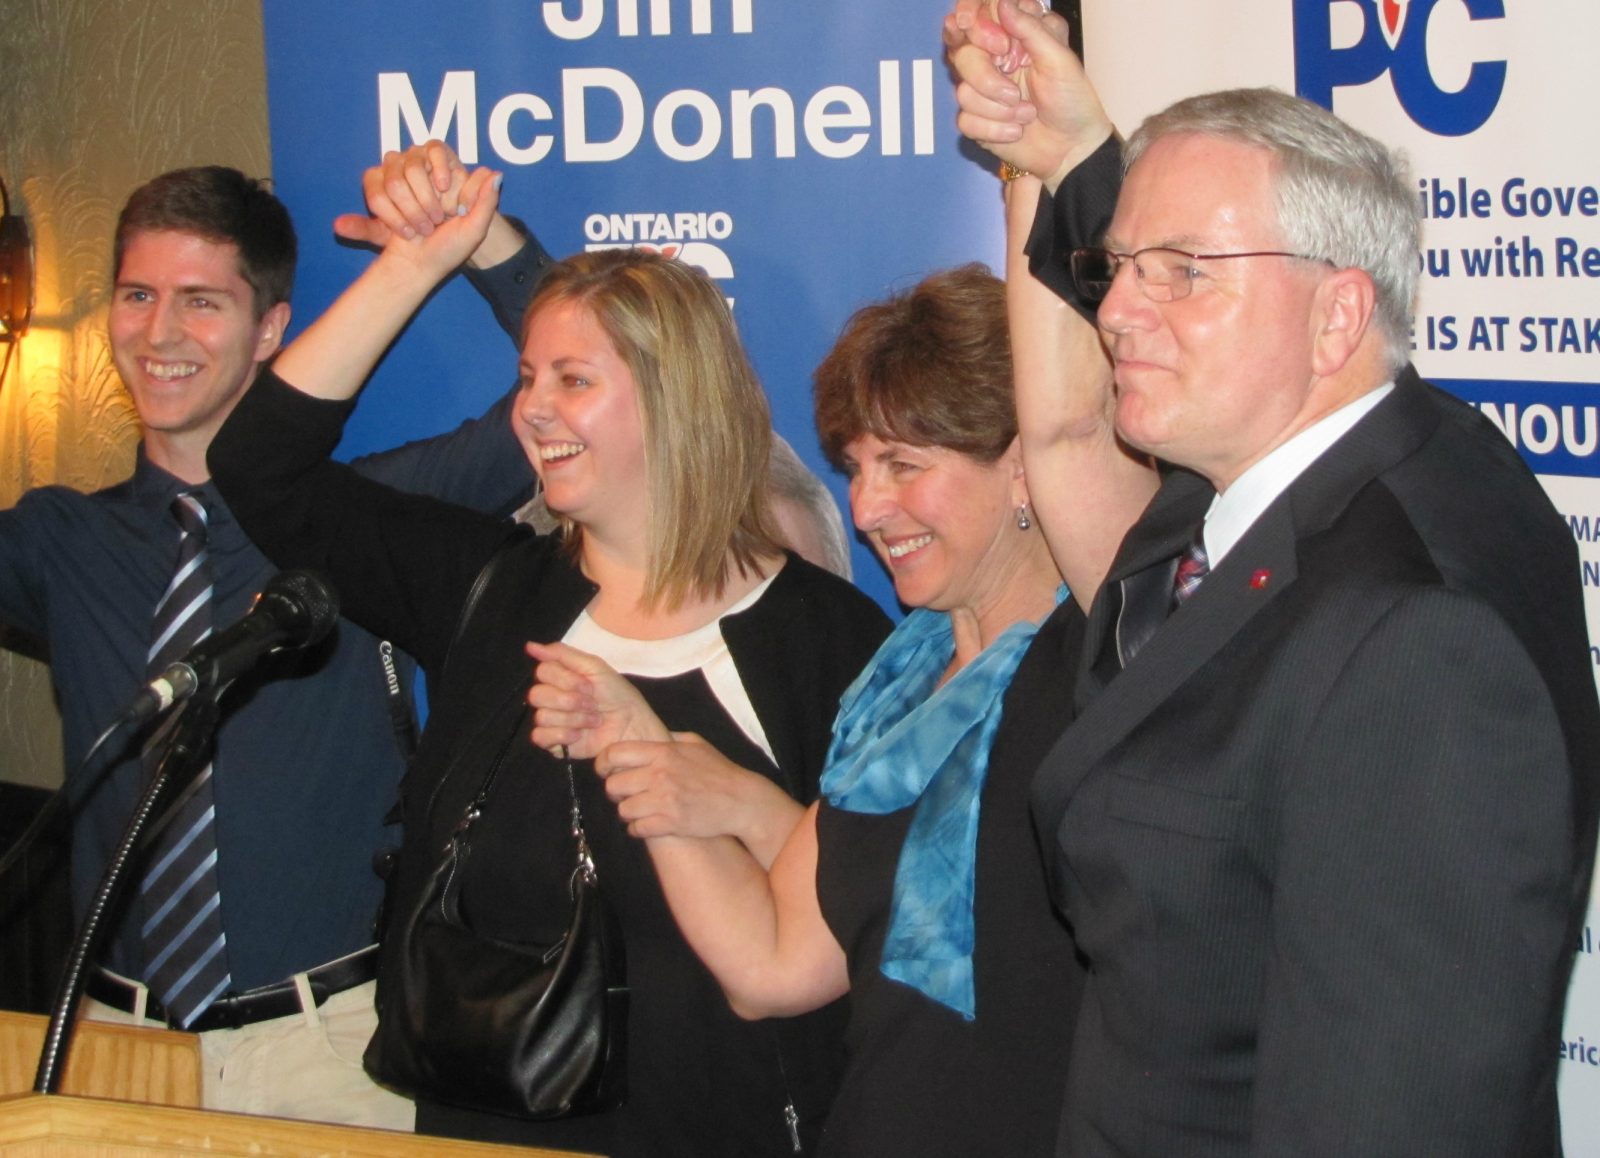 RETURN TRIP: McDonell wins re-election, with ease